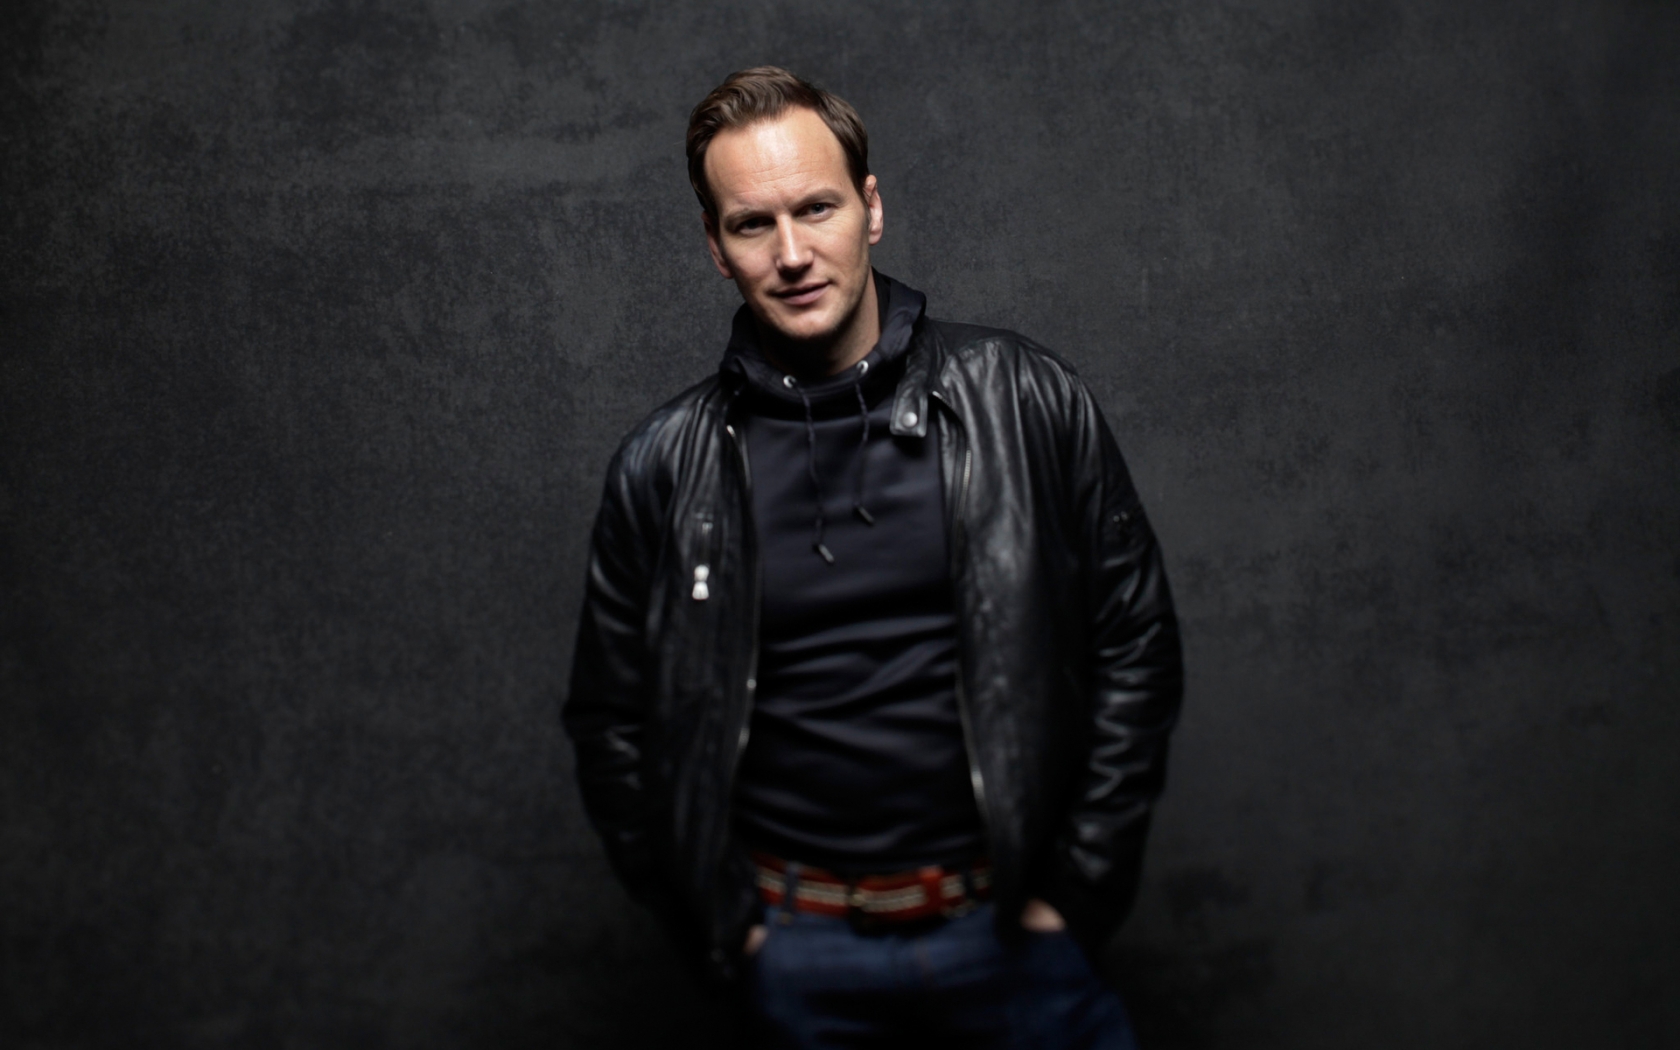  Patrick Wilson  for 1680 x 1050 widescreen resolution